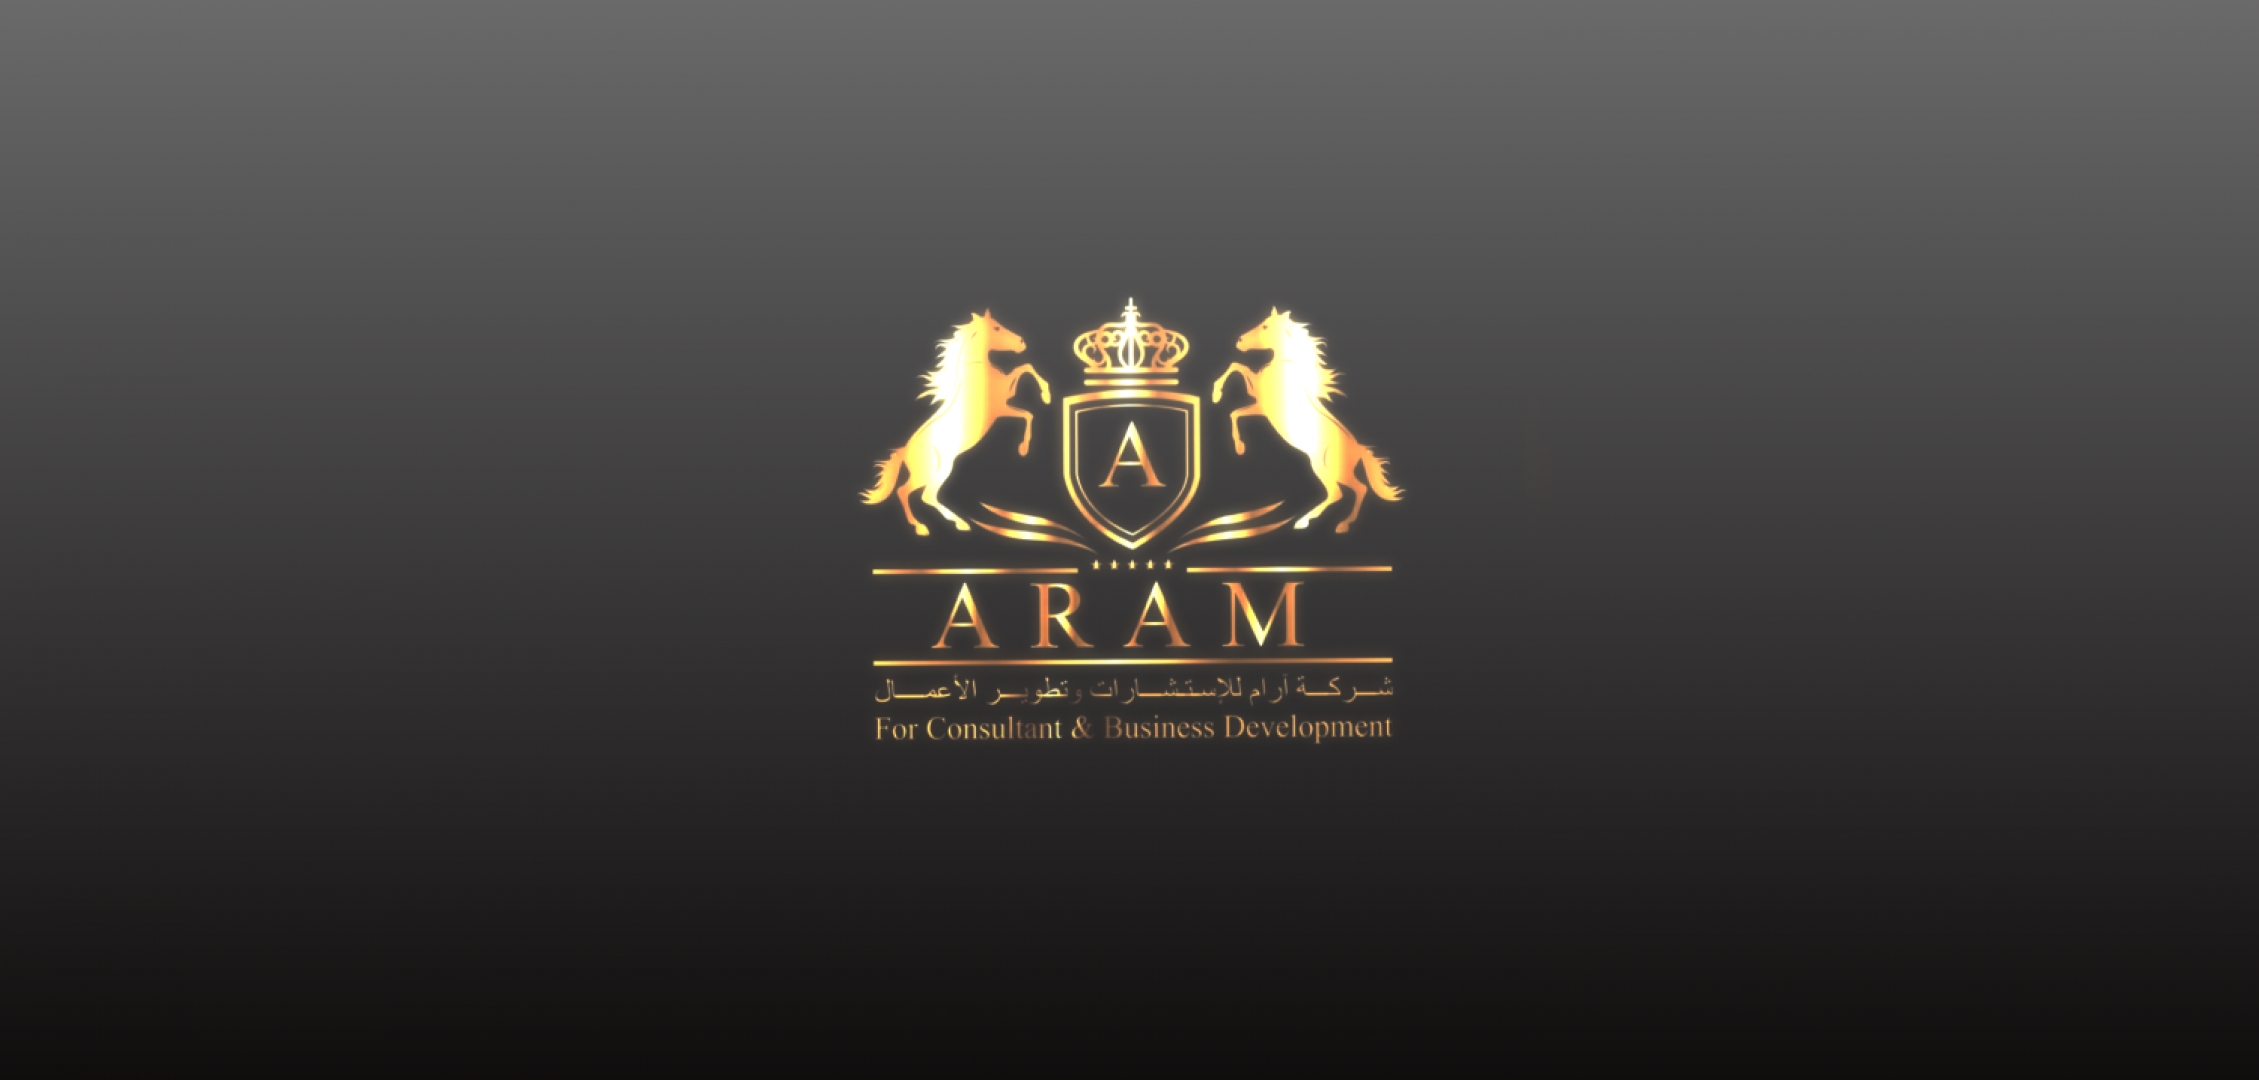 Aram Consulting and Business Development Company